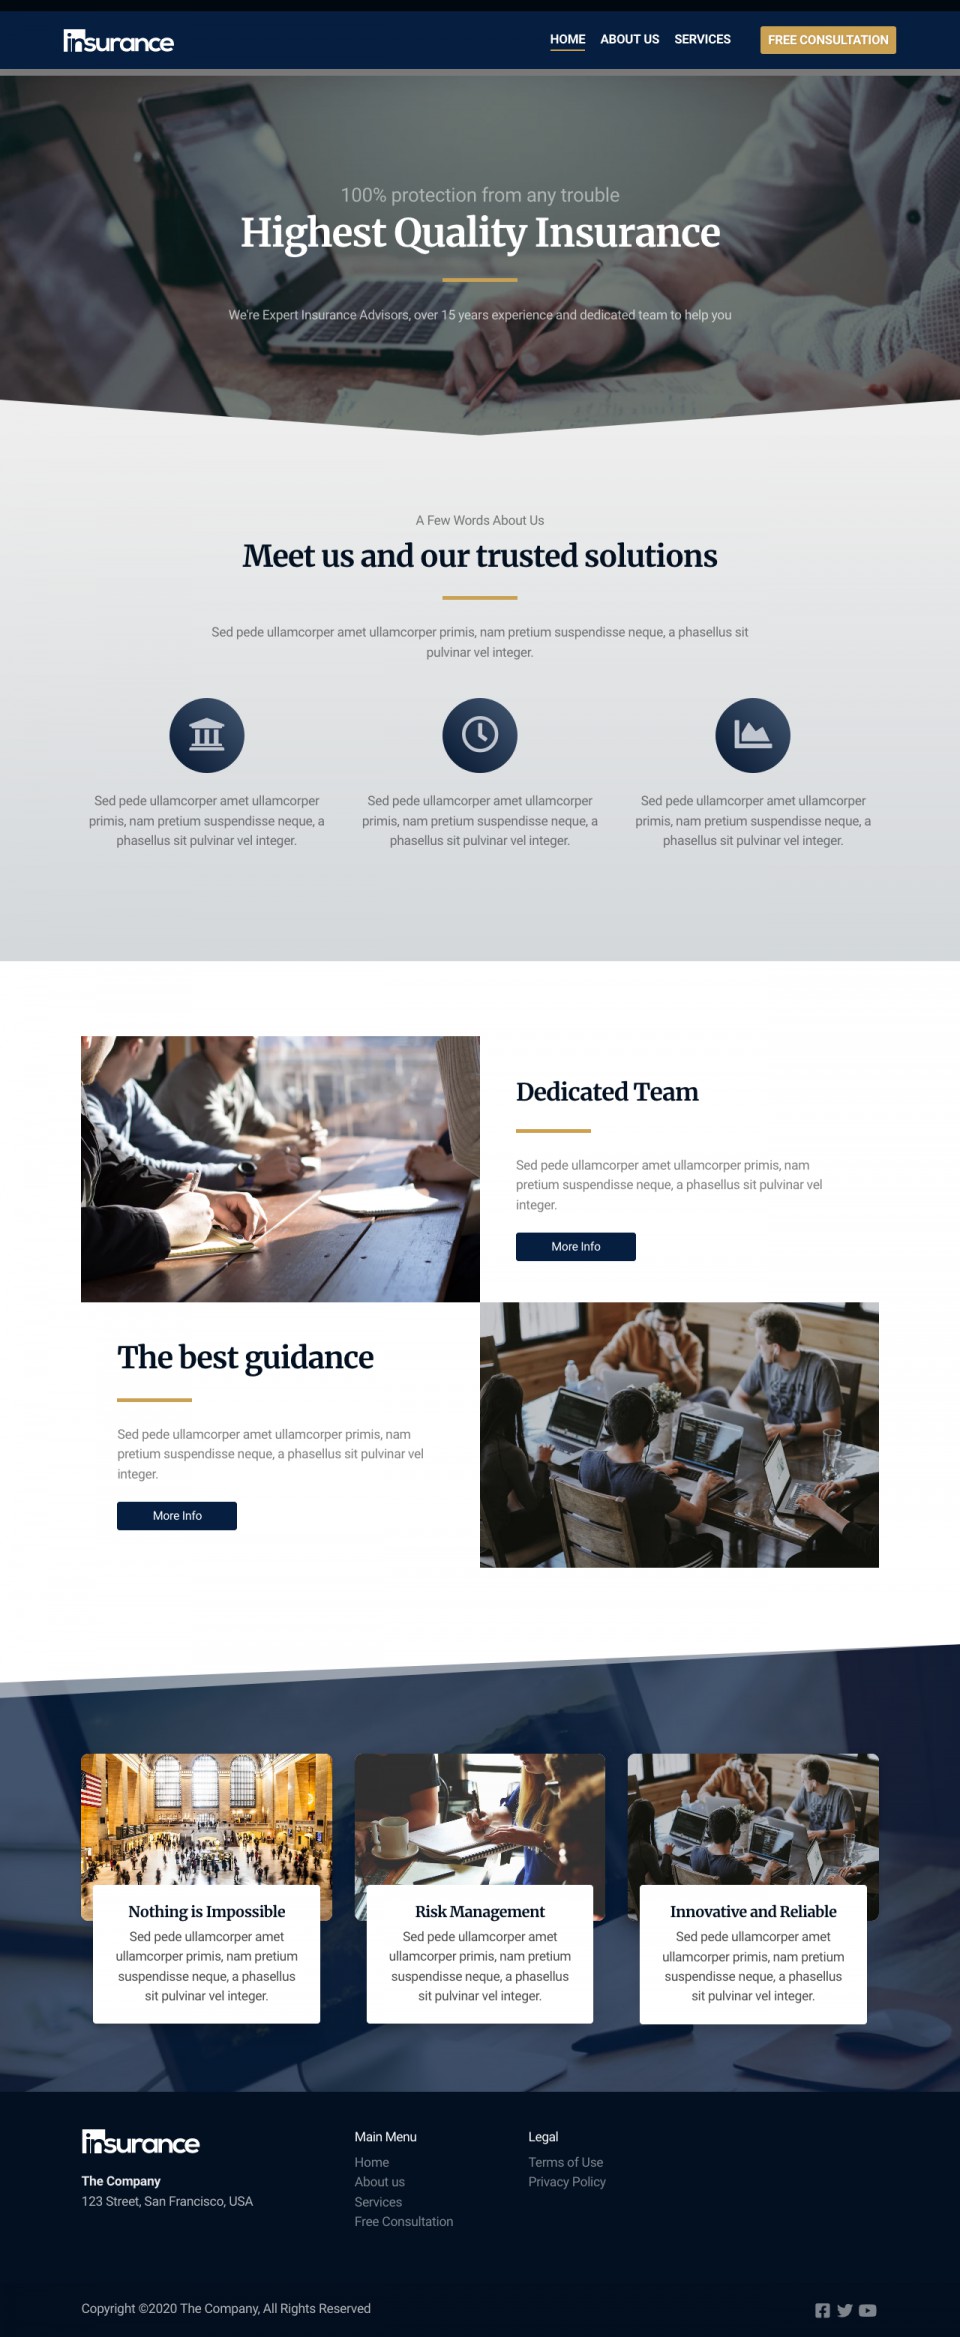 Insurance Website Template - Ideal for insurance brokers, financial advisors, and businesses looking to establish an online presence.